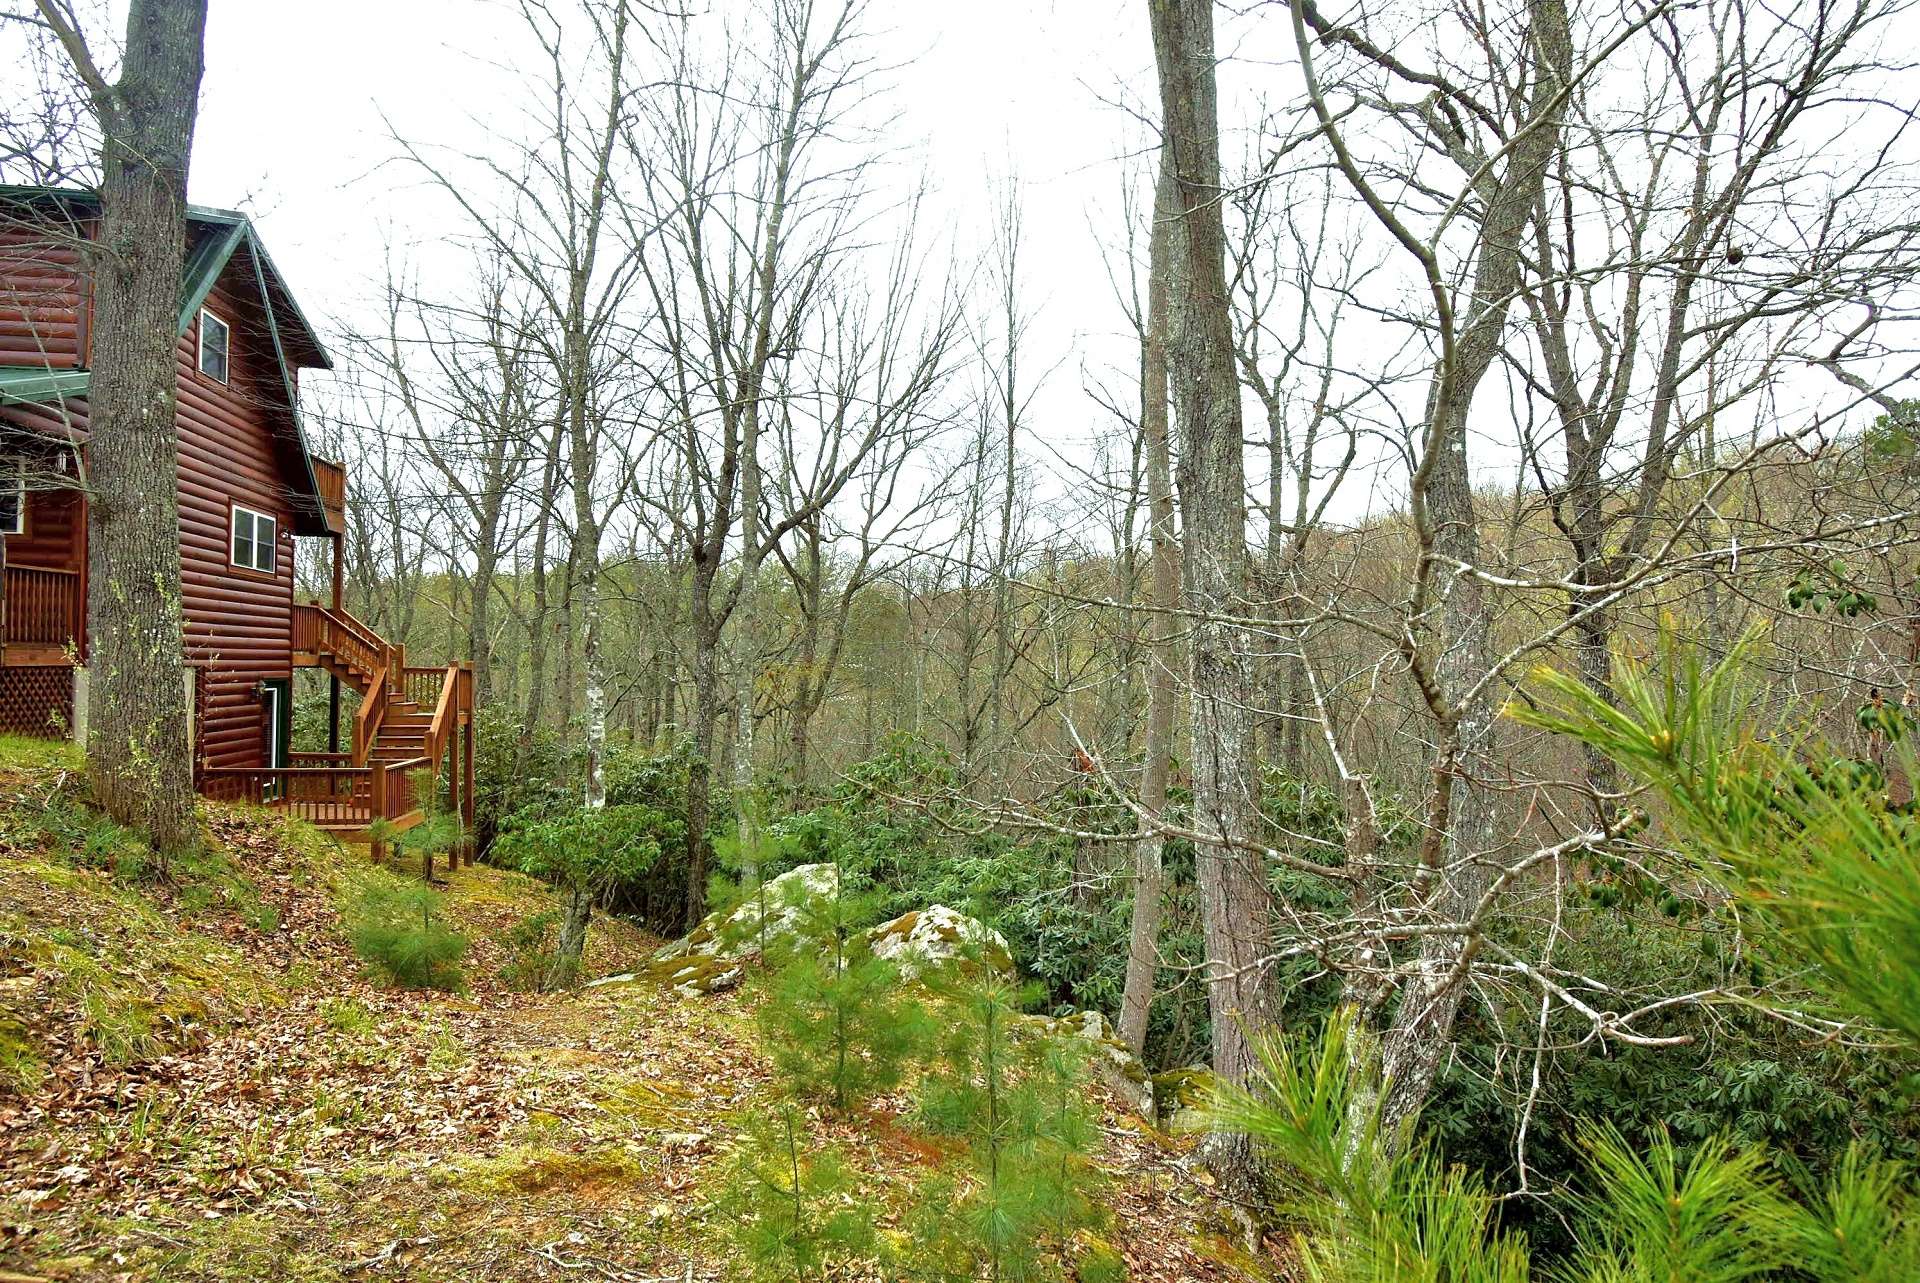 Nestled among a 1.34 acre setting with native hardwoods, evergreens and mountain foliage, this cabin is ideal for your mountain retreat.